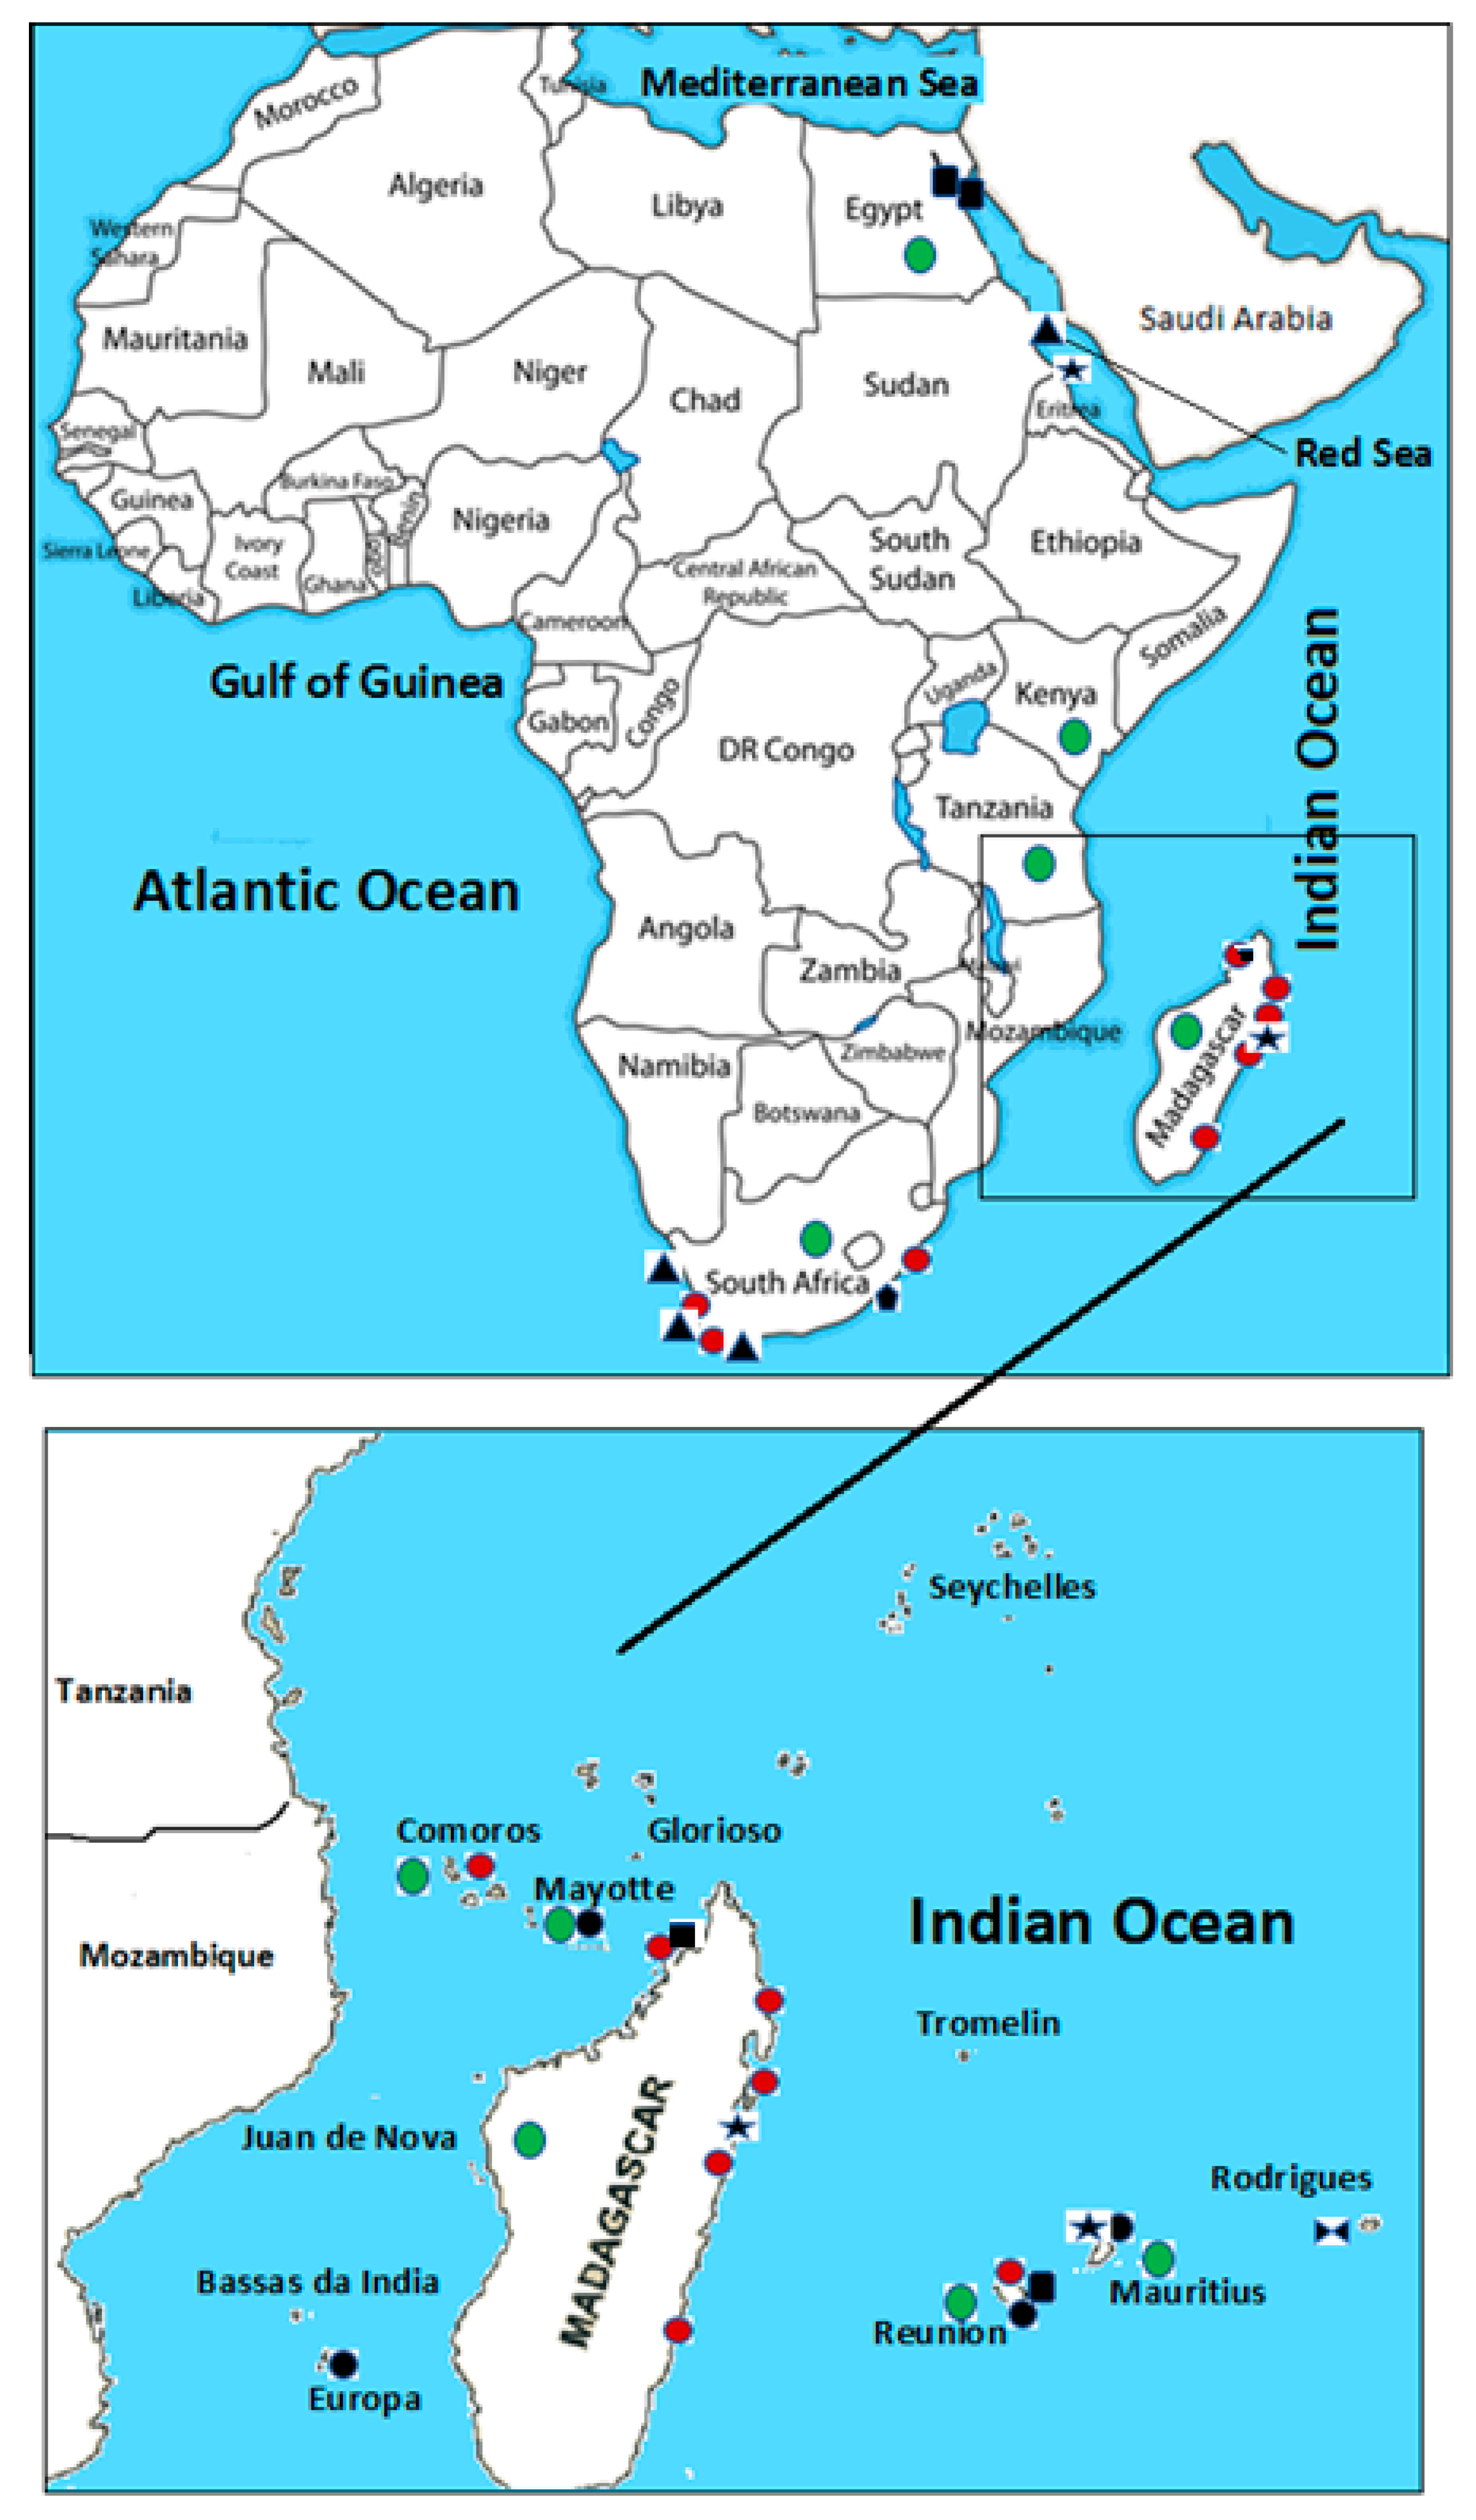 Toxins | Free Full-Text | The Incidence of Marine Toxins and the Associated  Seafood Poisoning Episodes in the African Countries of the Indian Ocean and  the Red Sea | HTML